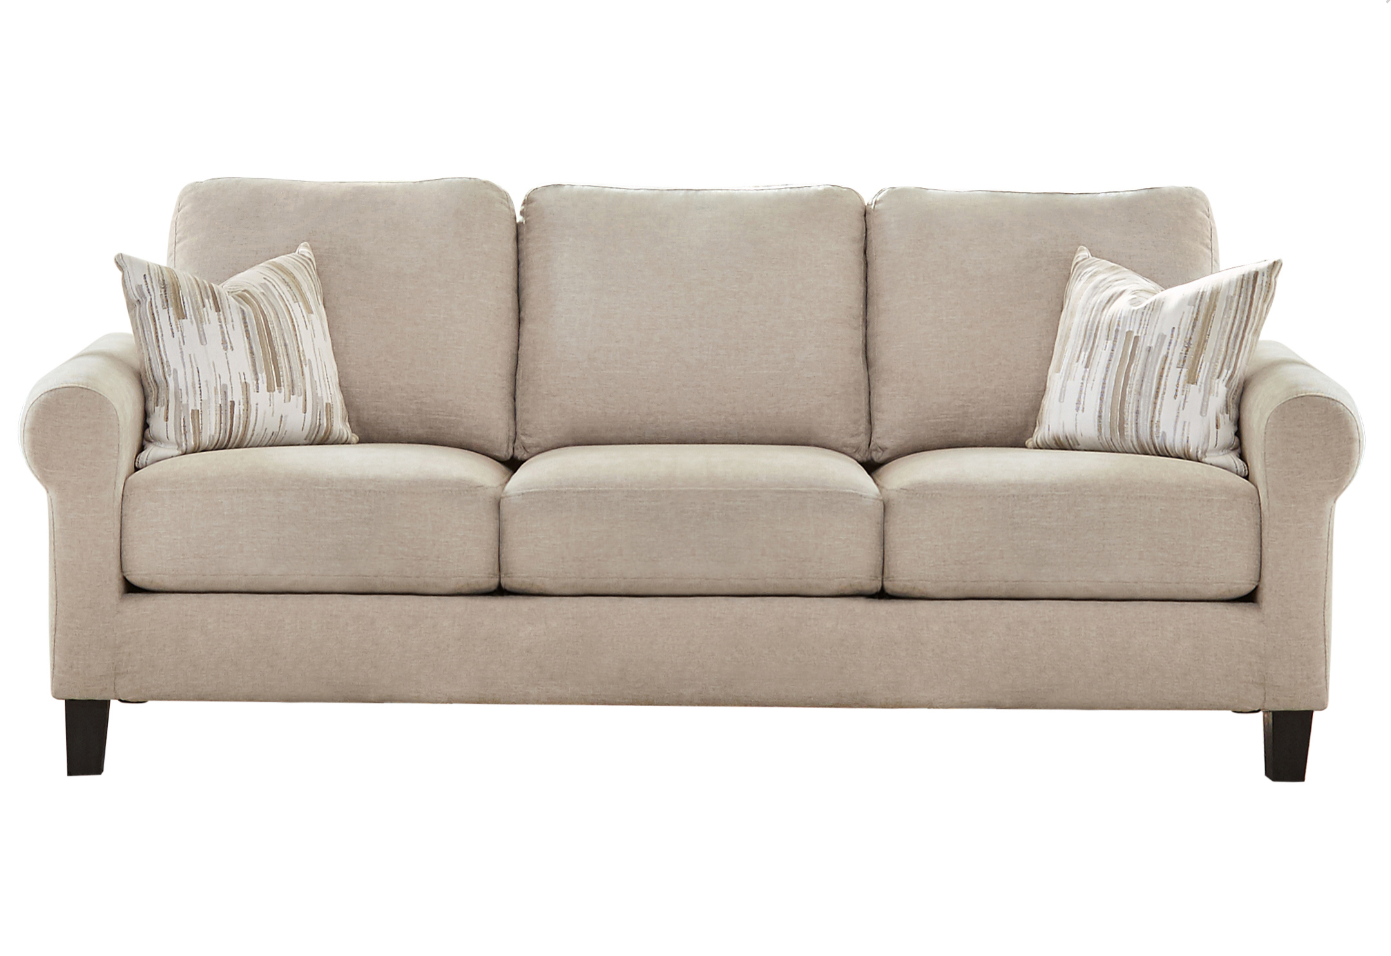 Nadine Classic Rolled Arm Sofa & Loveseat in Beige Chenille - Coaster 509781